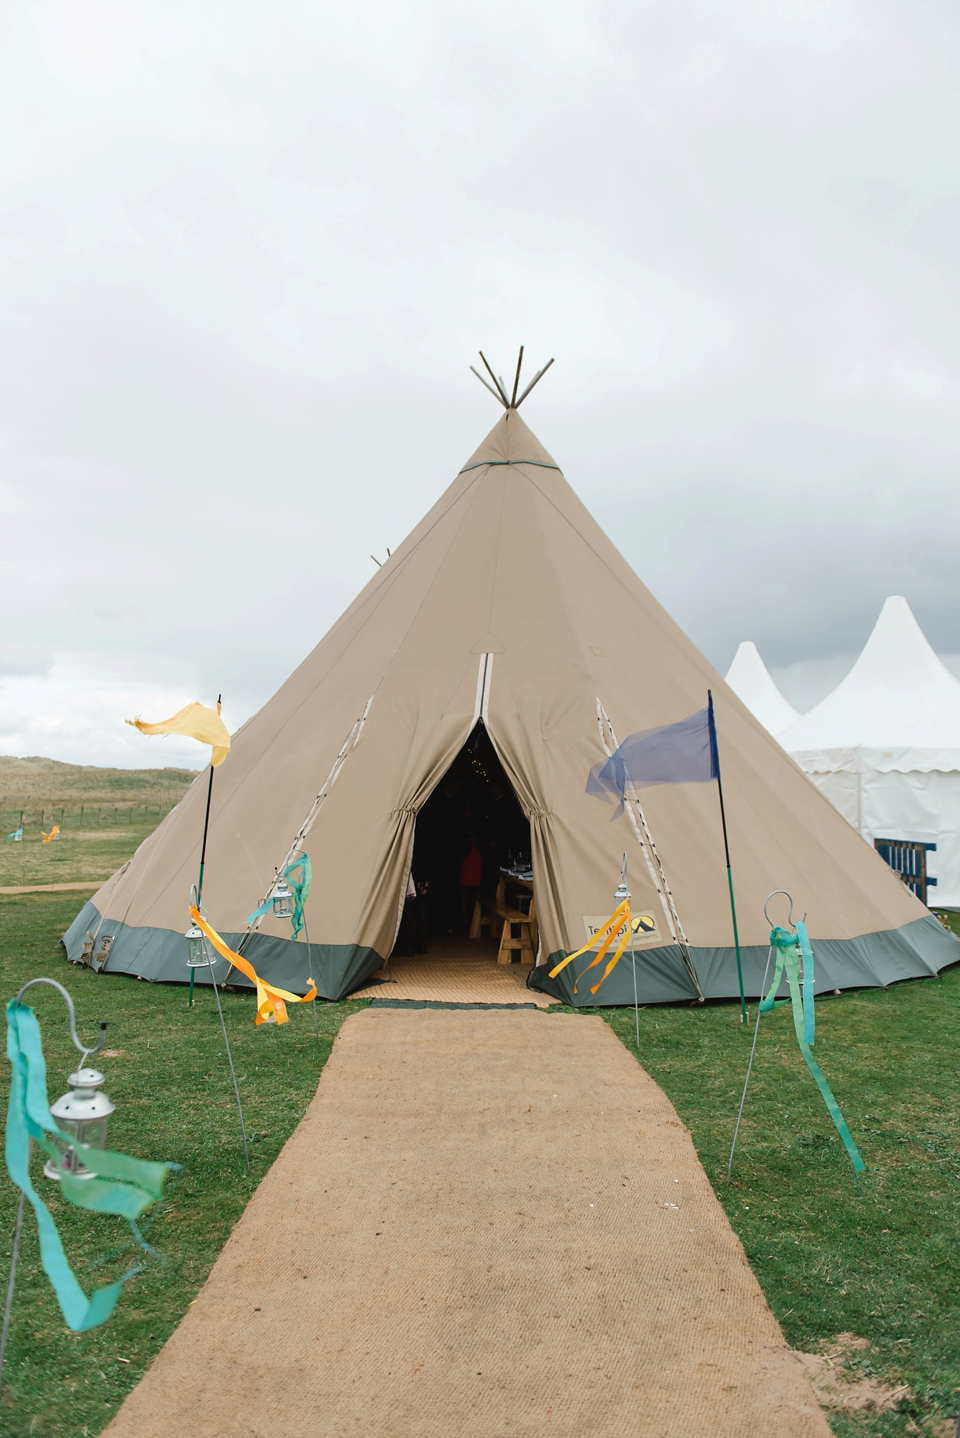 A 1950's vintage dress for a yellow and green Humanist tipi wedding in Scotland. Images by Mack Photo.